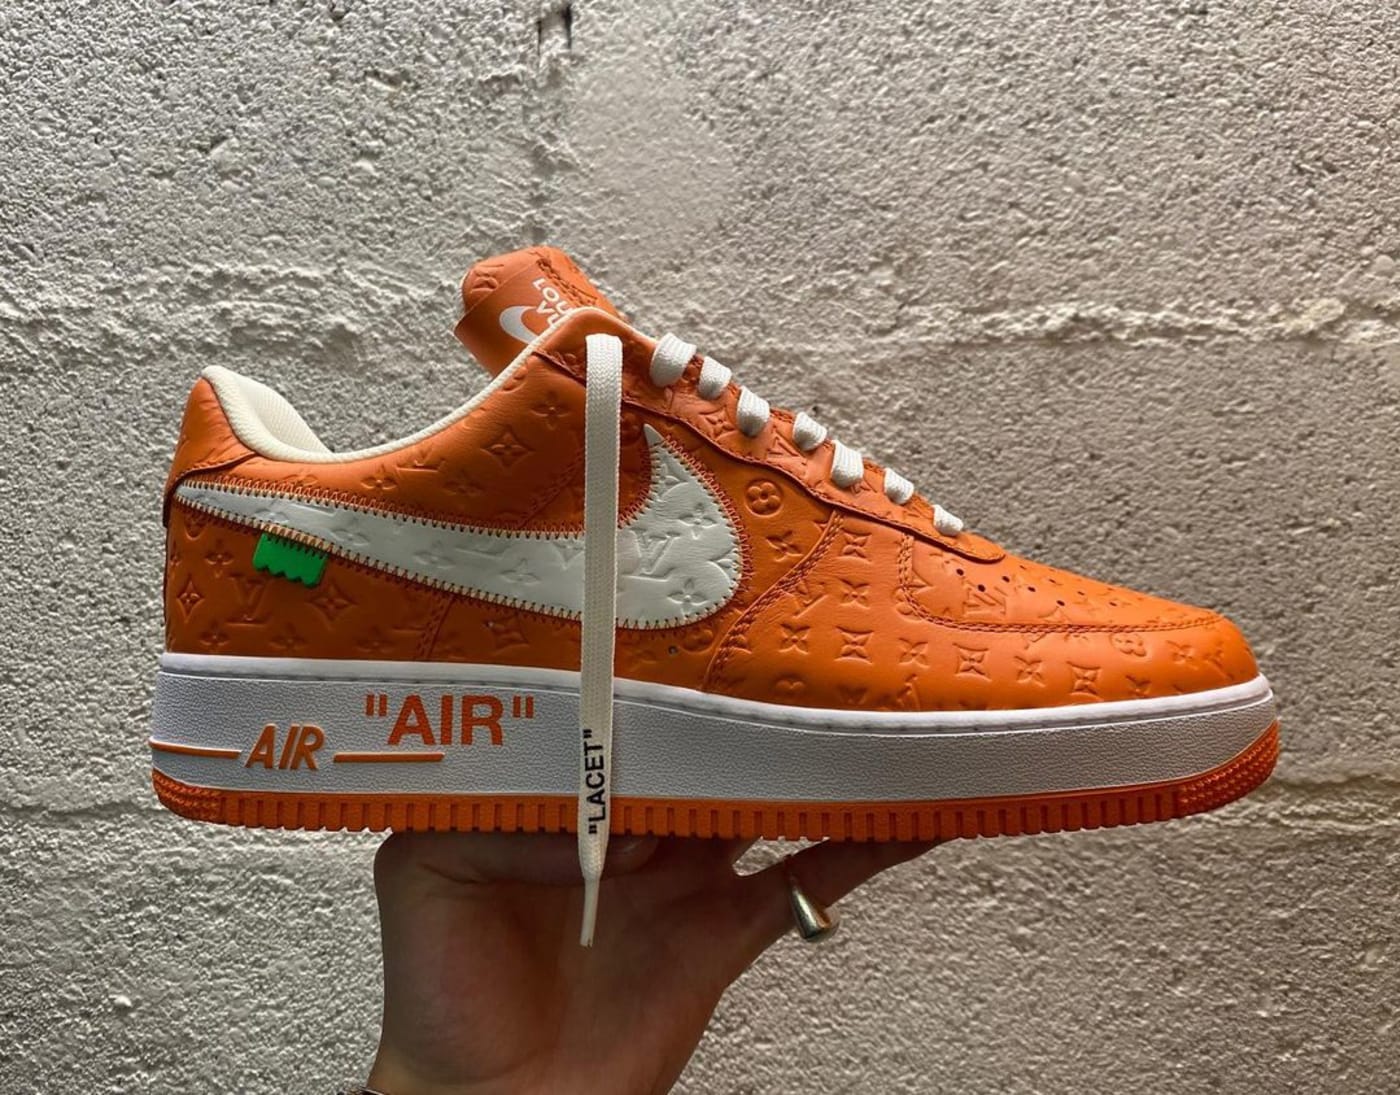 Louis Vuitton x Nike Air Force 1 Low Friends & Family Colorway | Complex